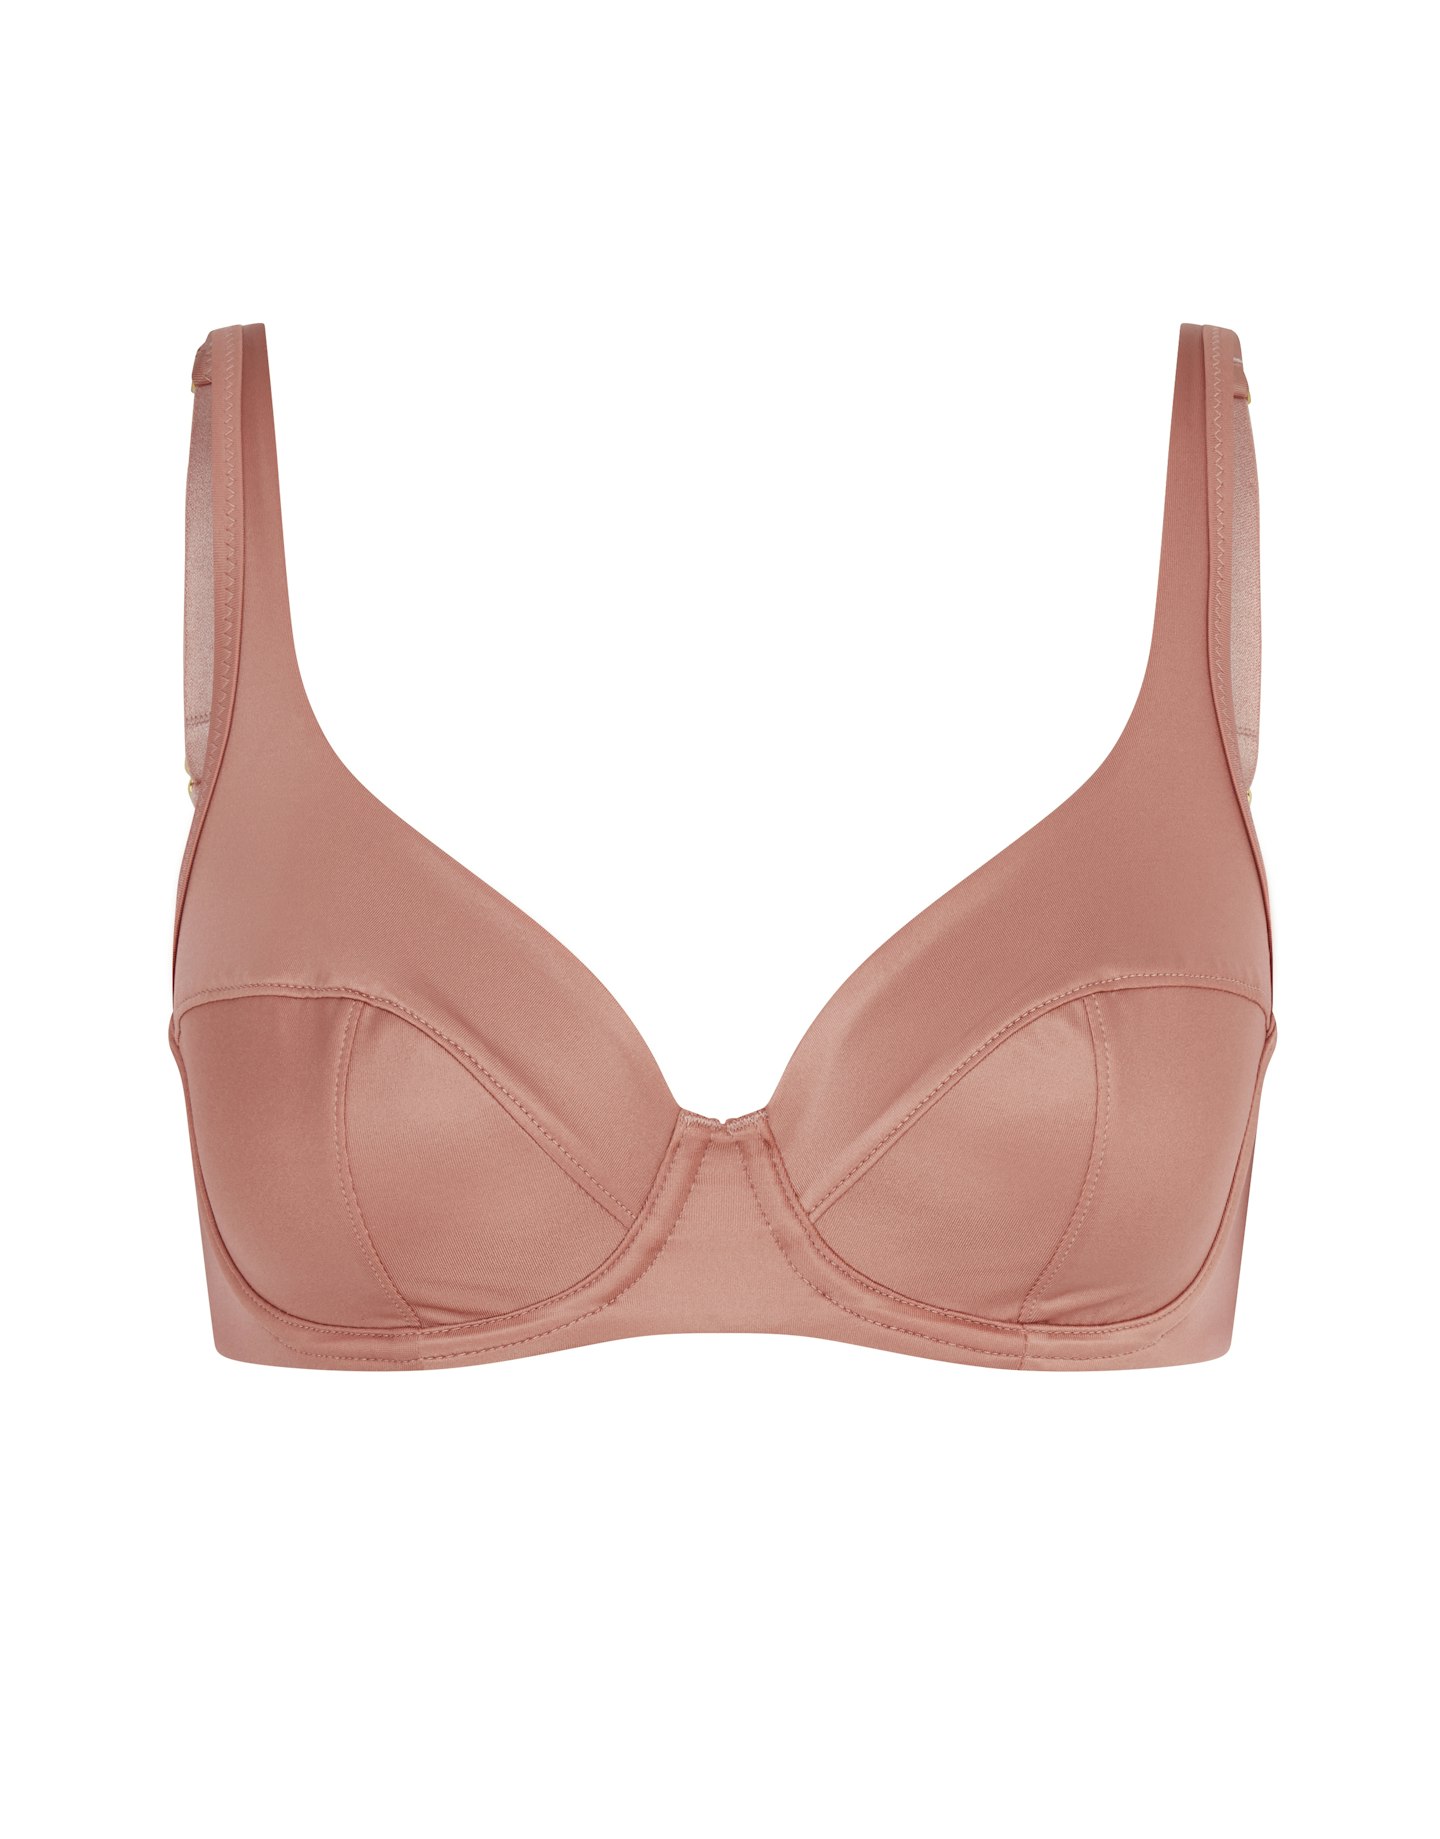 Fans say they are 'converted to this style for good' as M&S bra